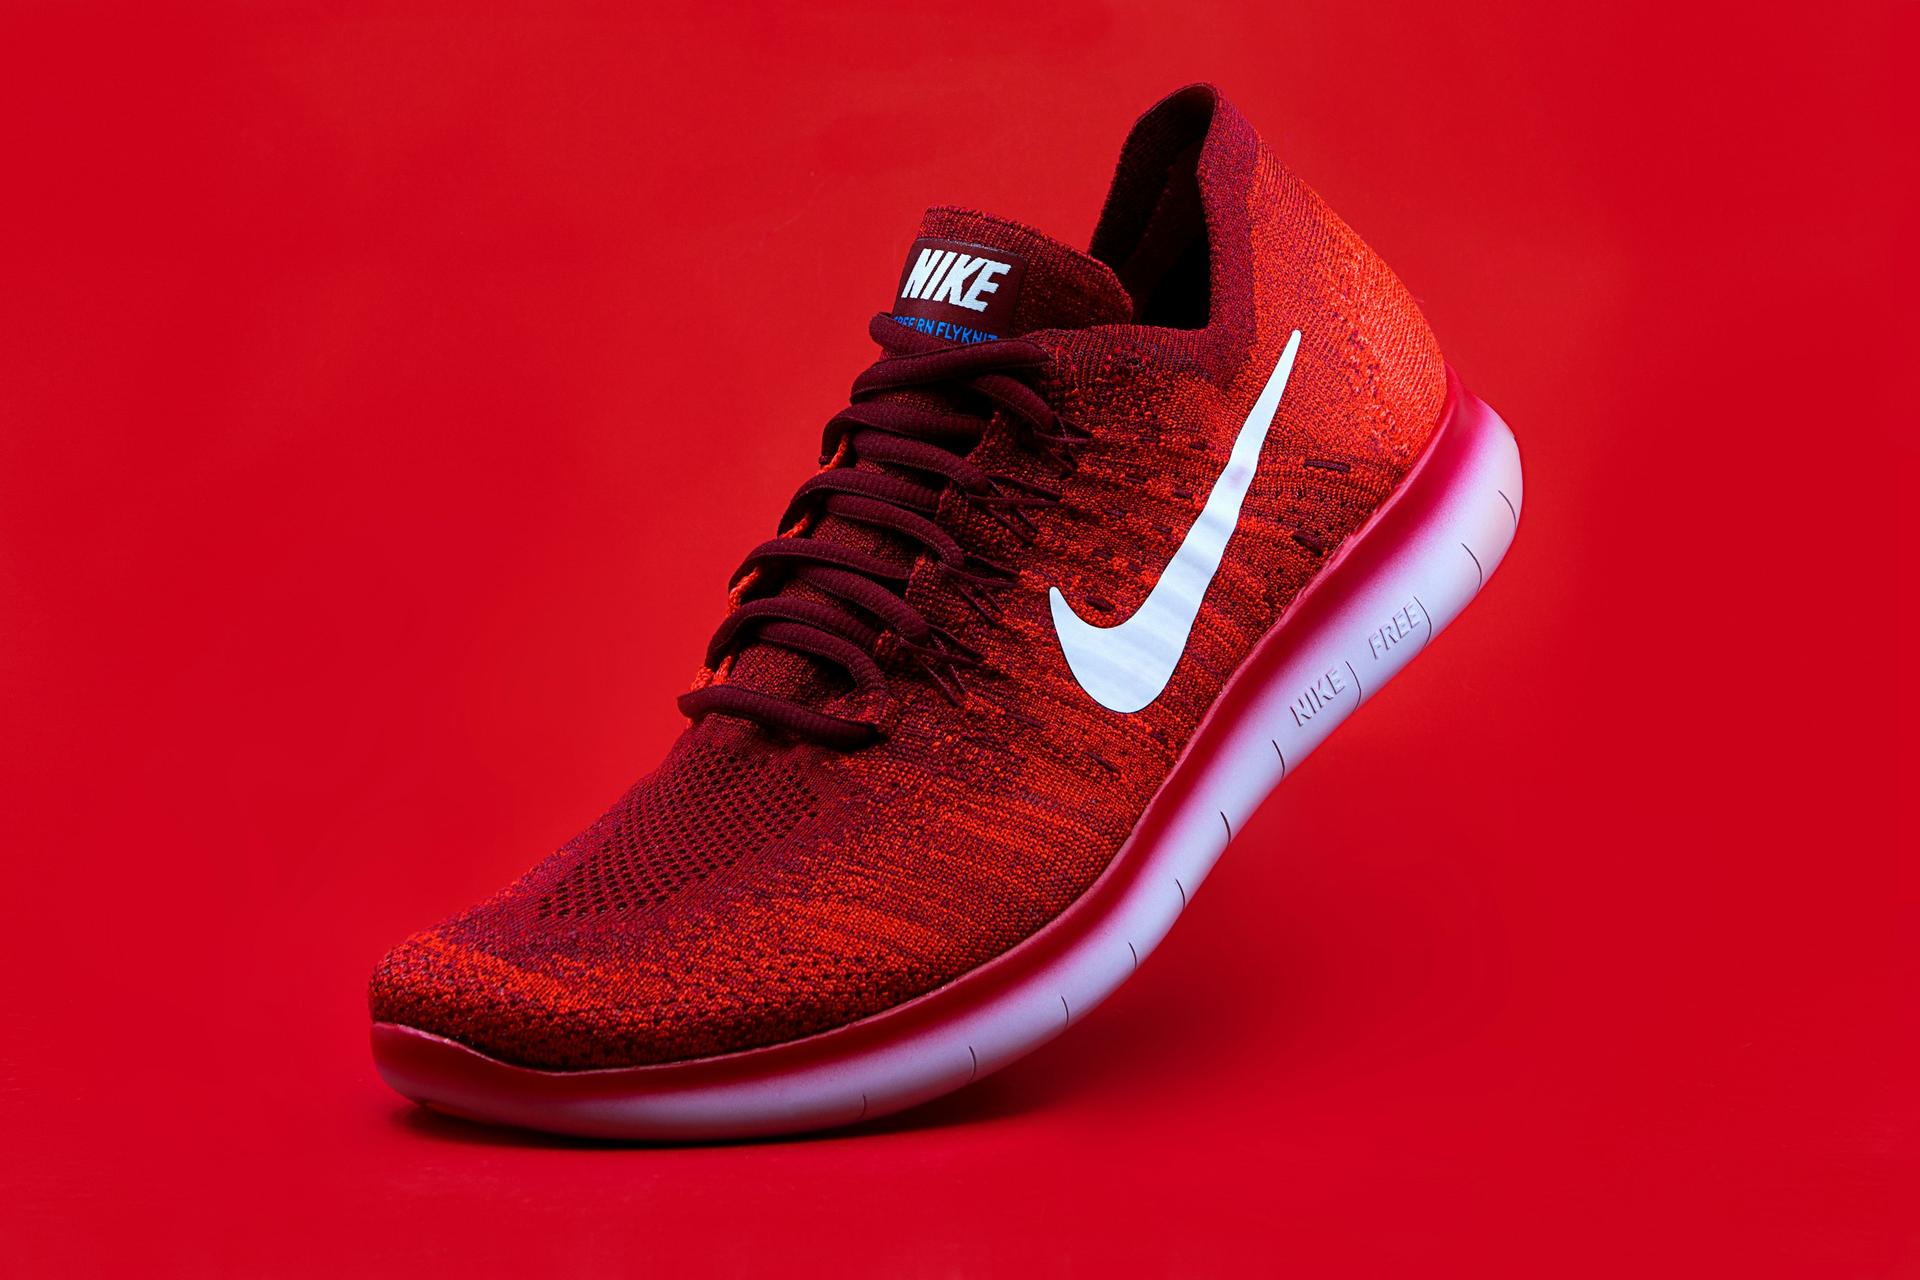 Nike Running Shoes - Energize Your Run with Style and Performance(Red)